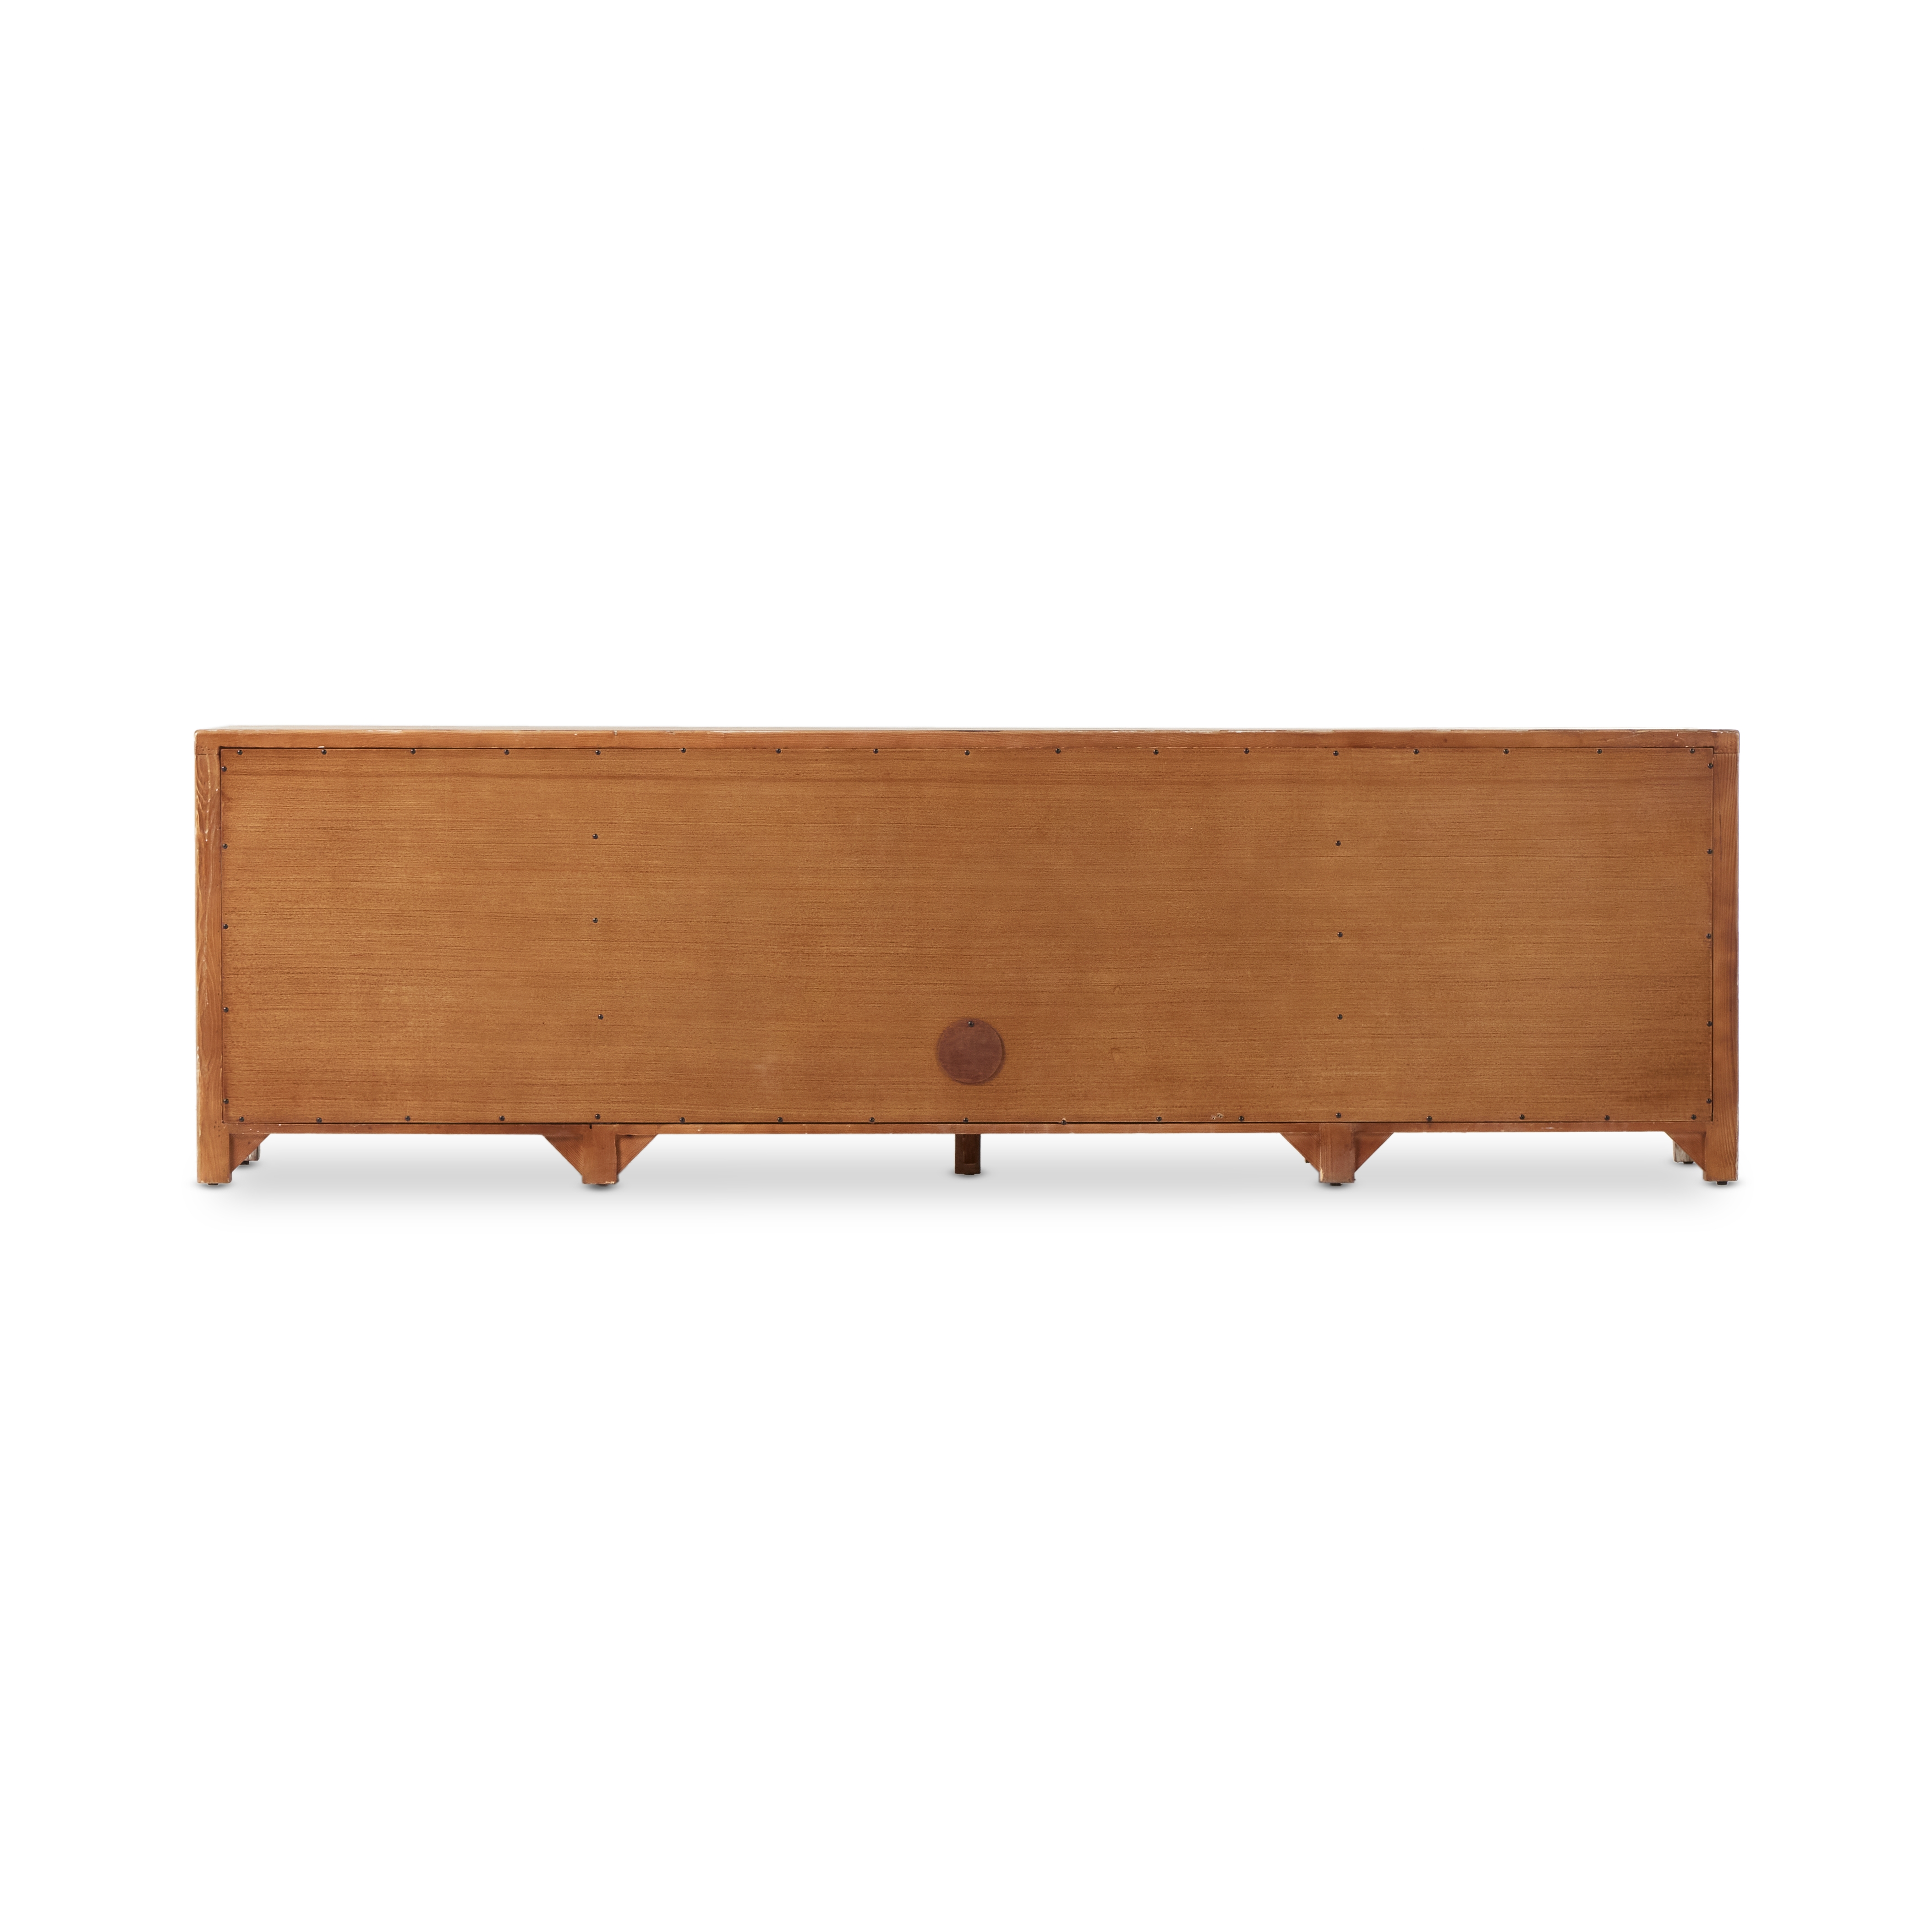 Gaines Media Console-Aged Light Pine - Image 7